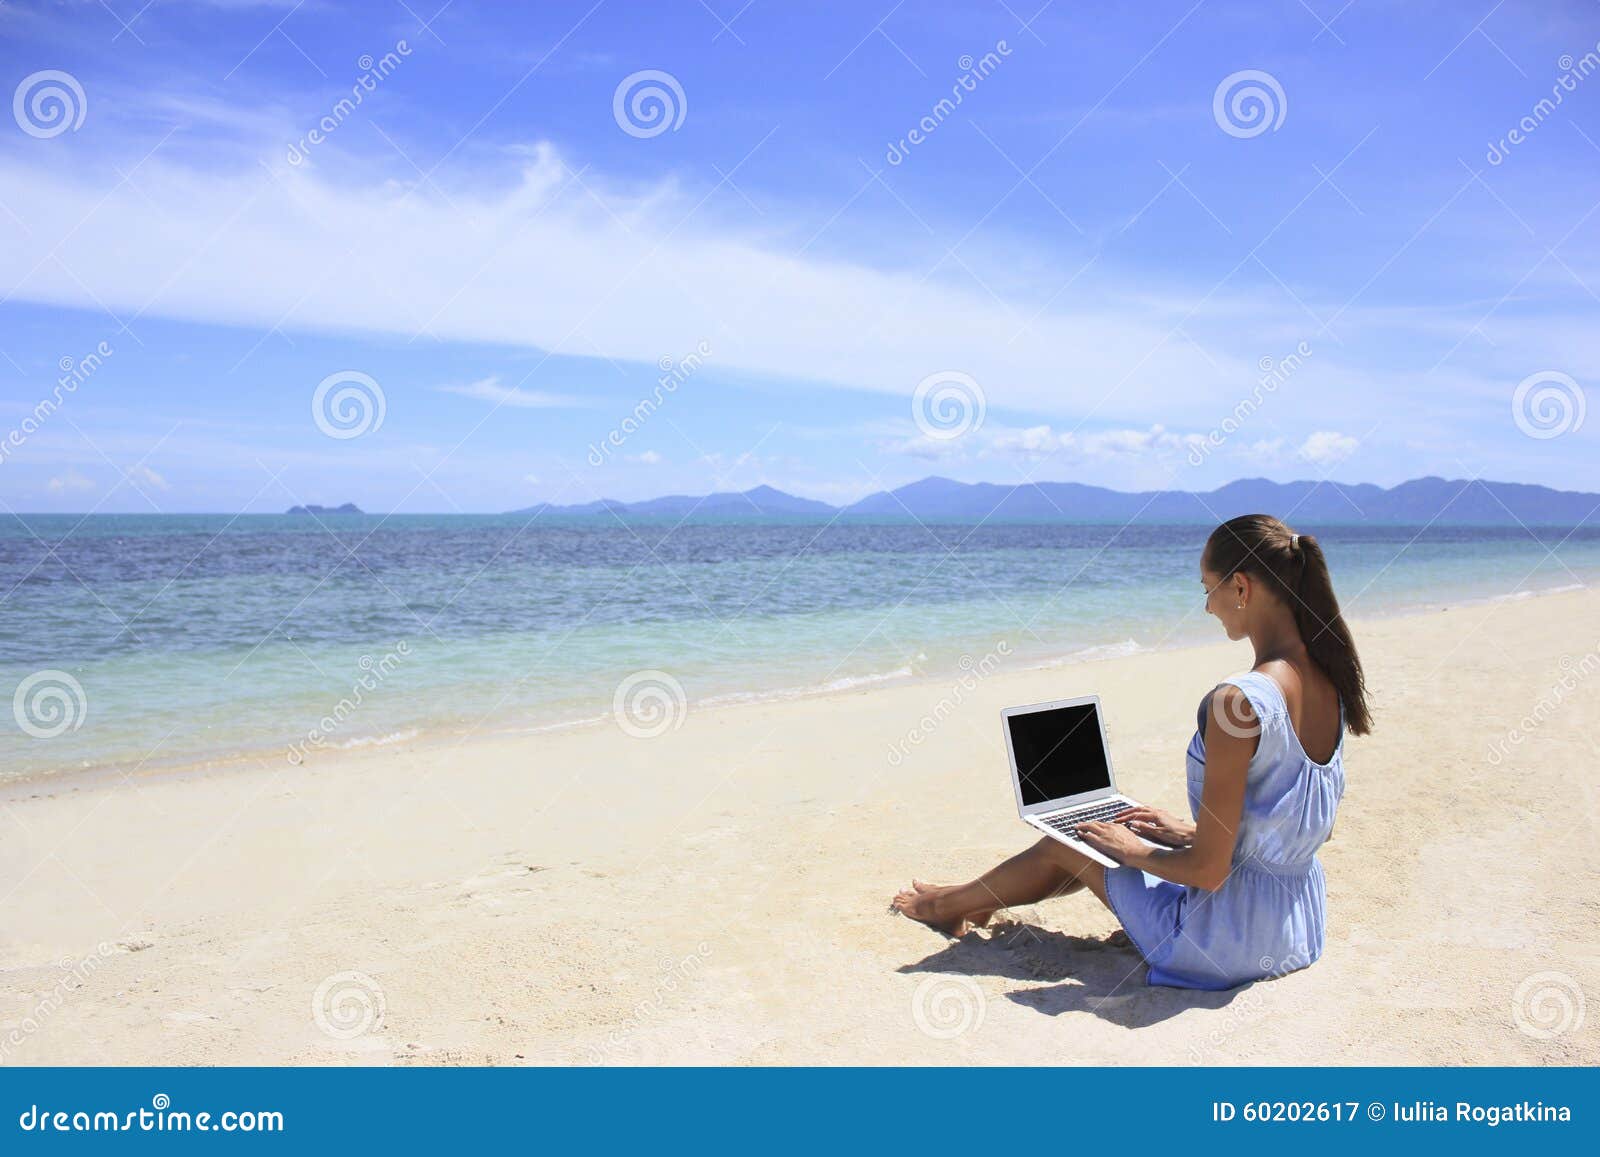 bussines woman working on the beach with a laptop